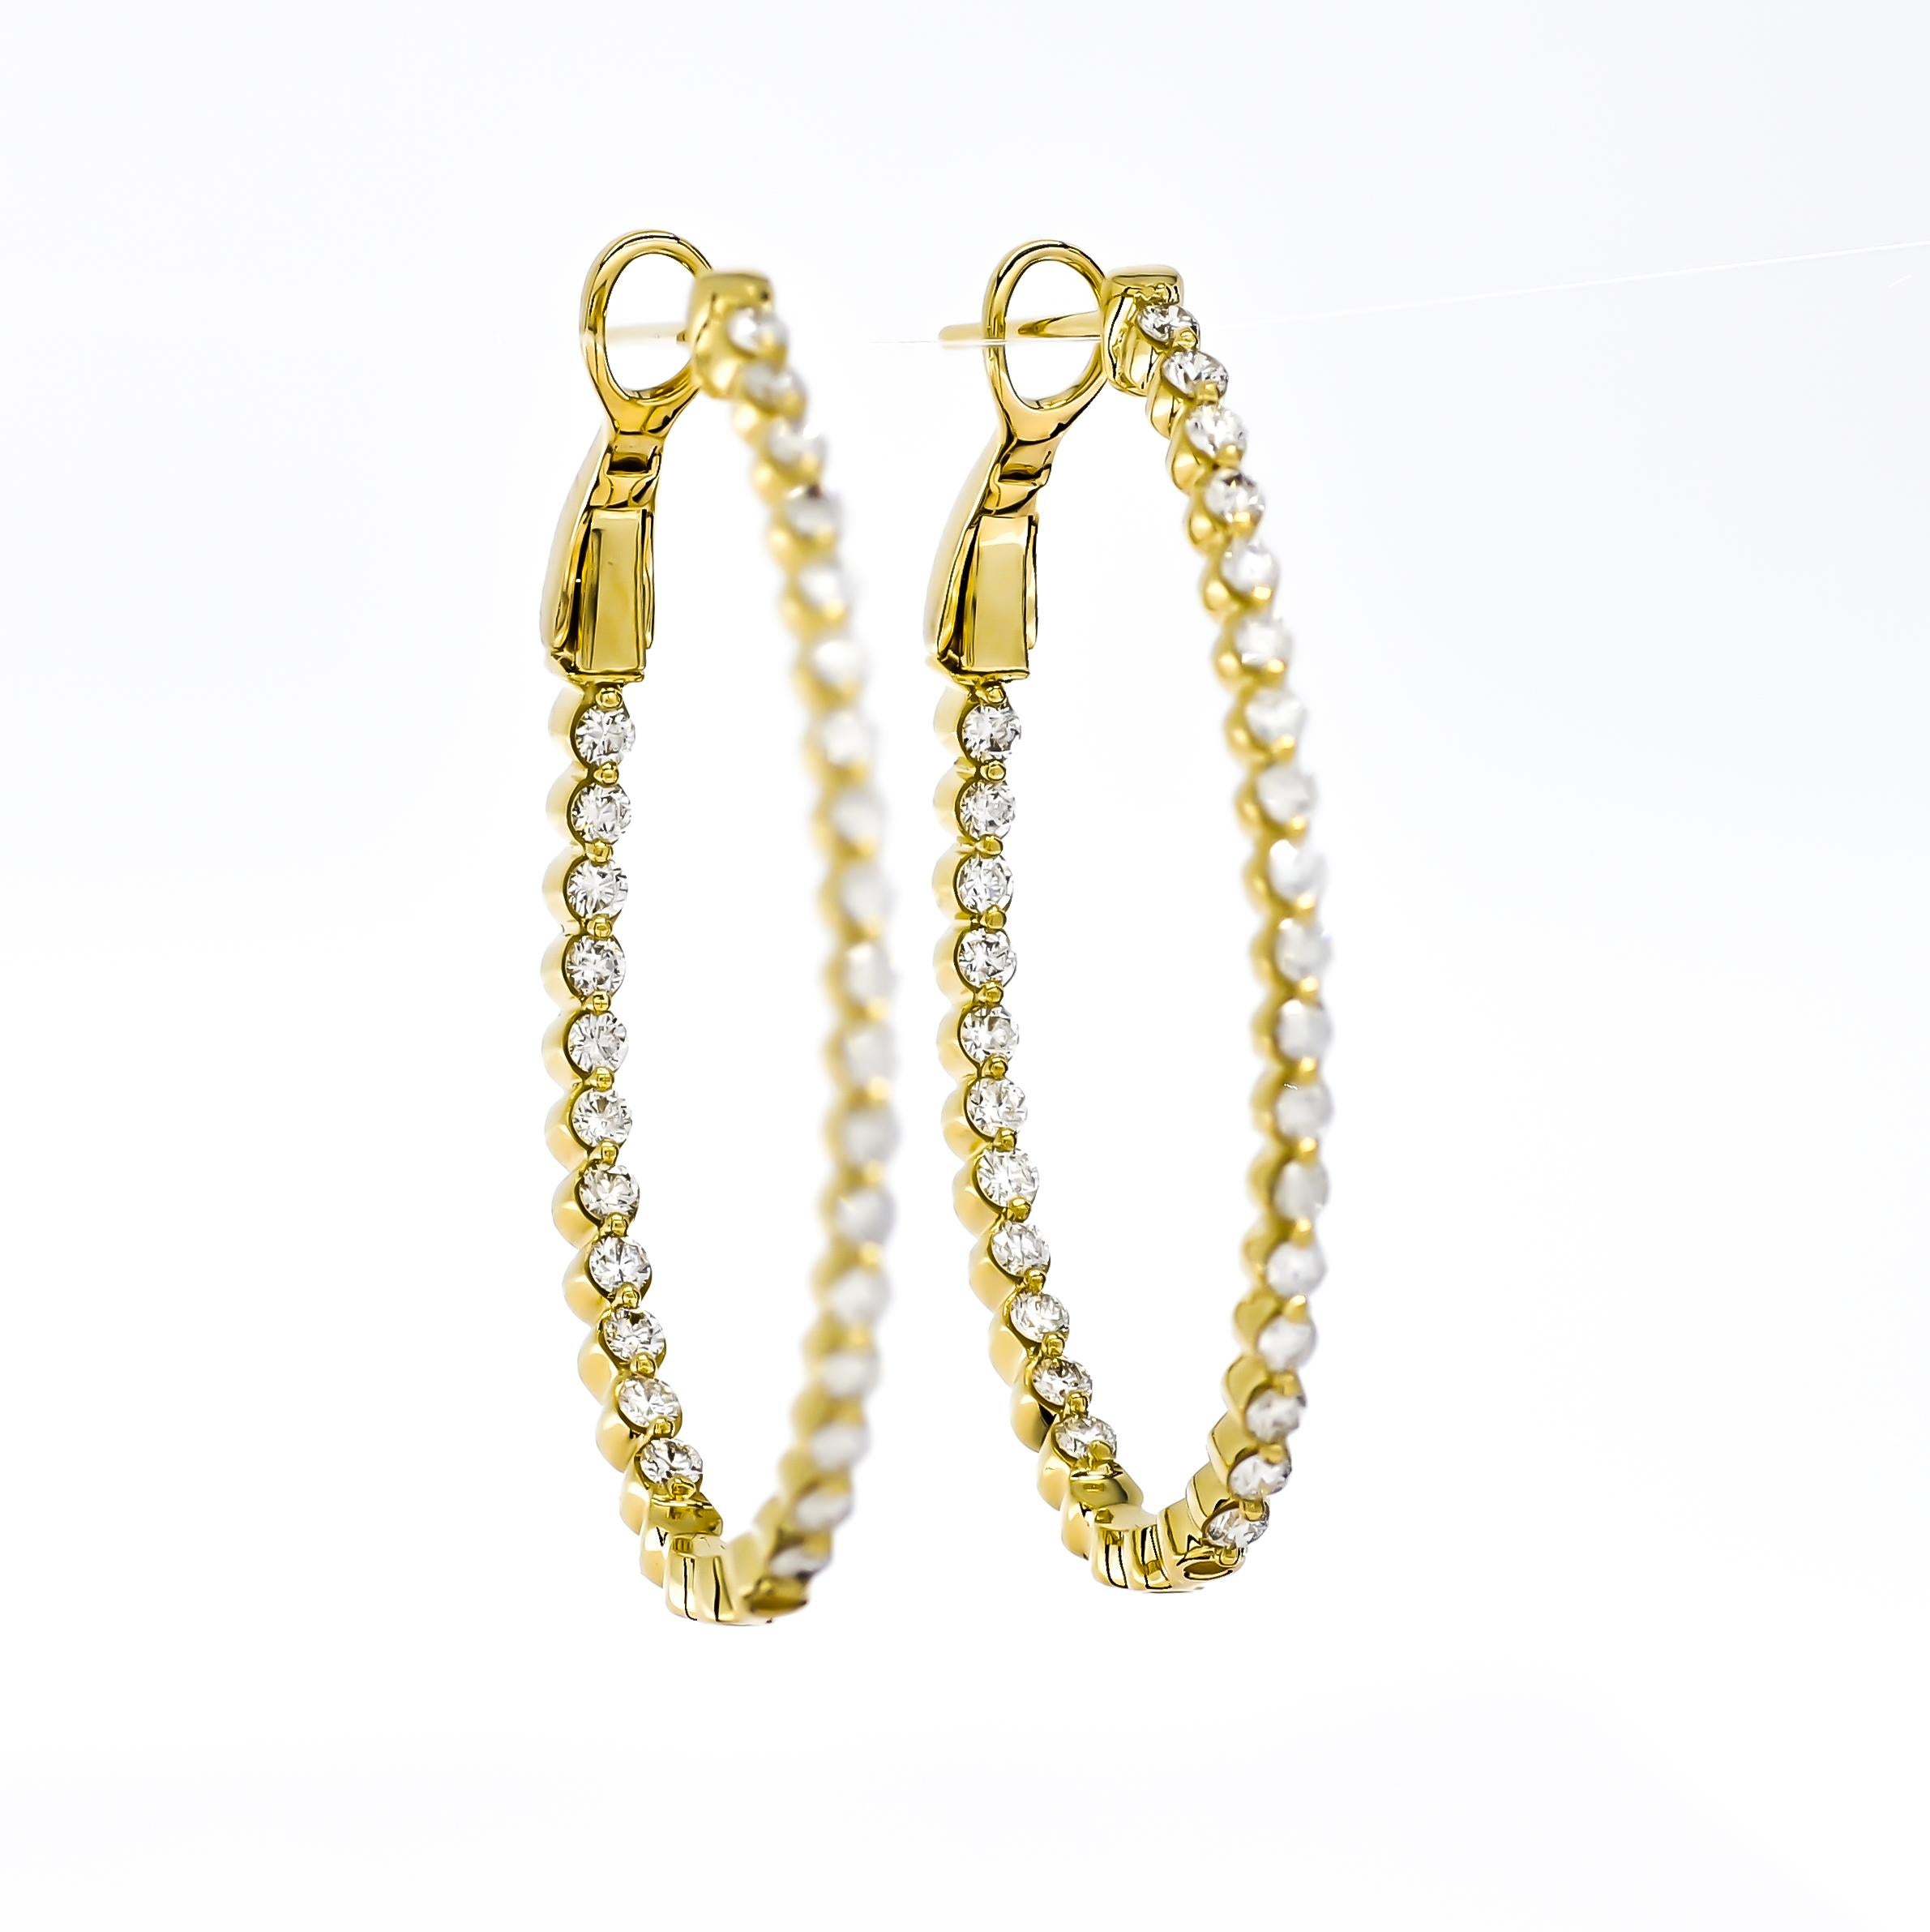 Feast your eyes on the 18KT Gold Single Row Diamond In and Out Hoop Huggies Earring, a symbol of pure sophistication and unmatched elegance. It's the perfect piece to enhance any ensemble, subtly showcasing a refined taste for luxury.

Crafted in